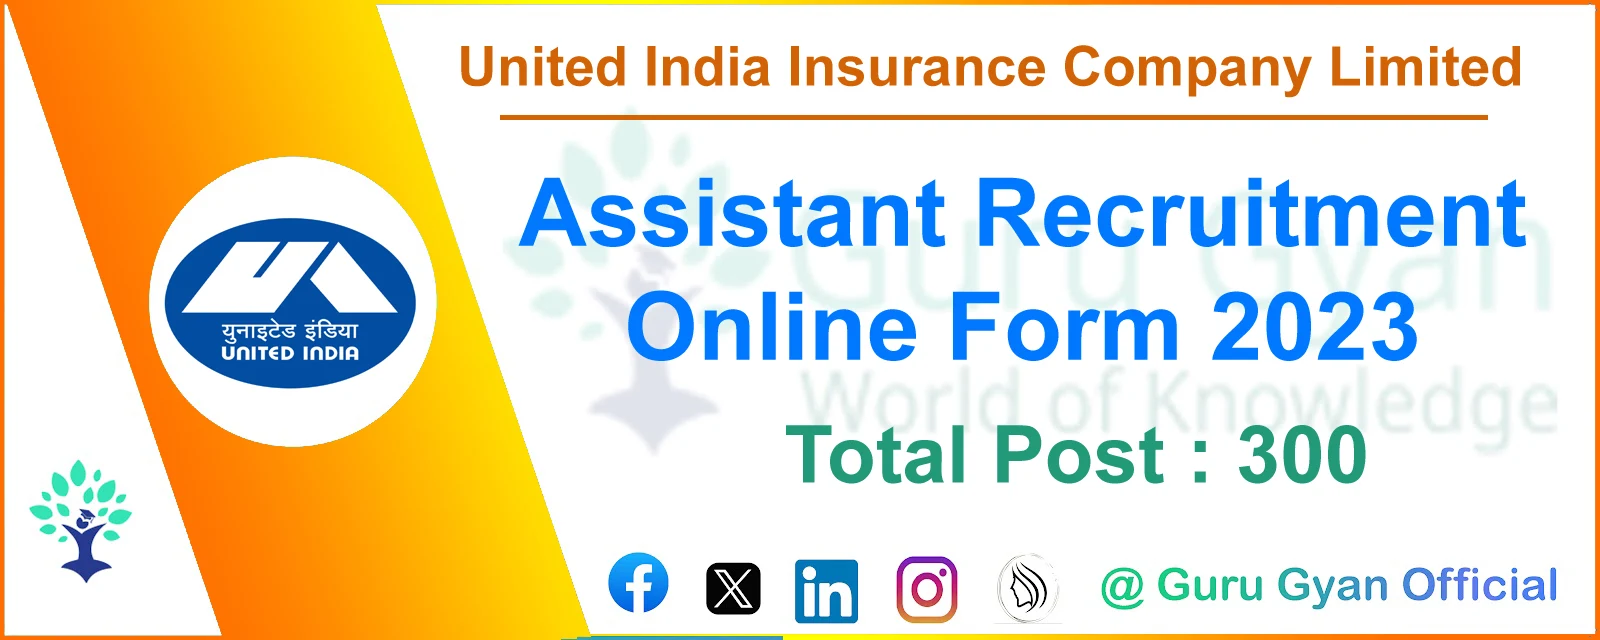 United Insurance (UIIC) Assistant Online Form 2023